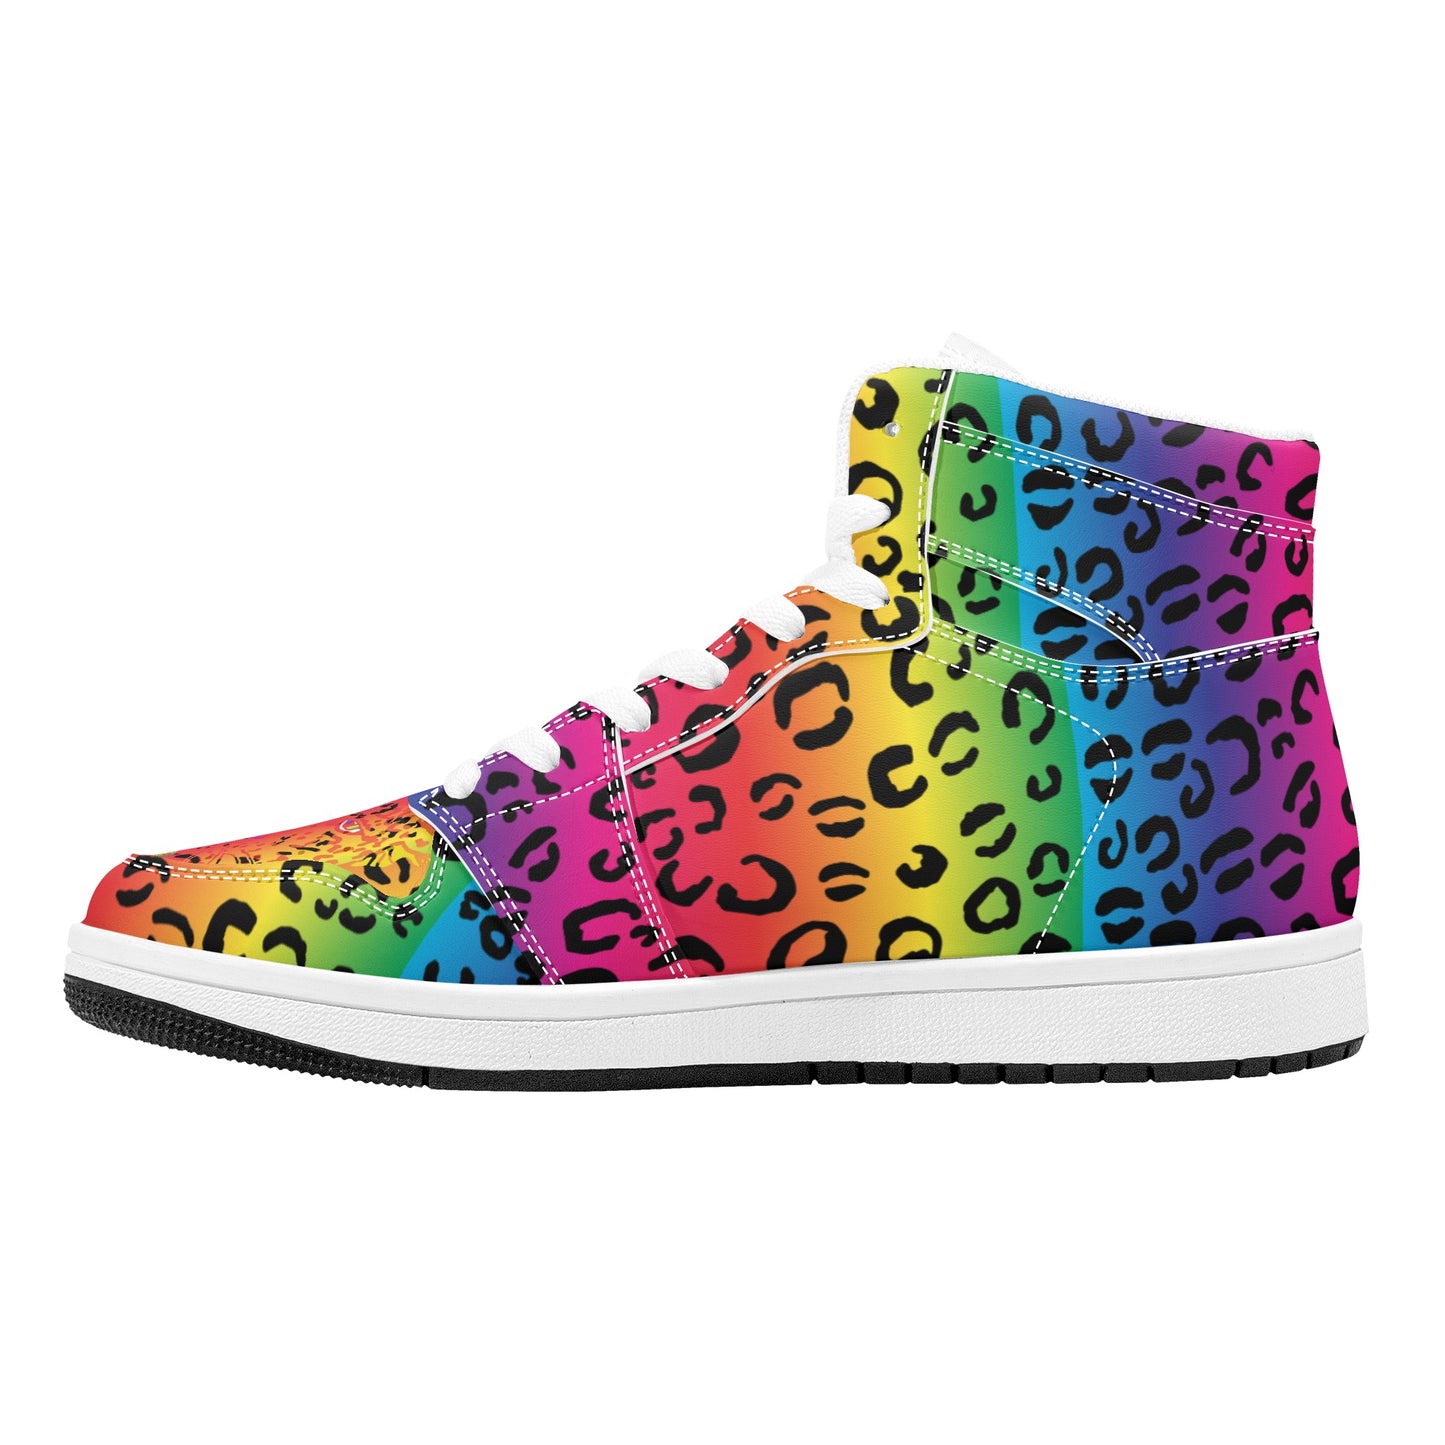 Mens Rainbow Leopard High Top Leather Sneakers - HipHatter